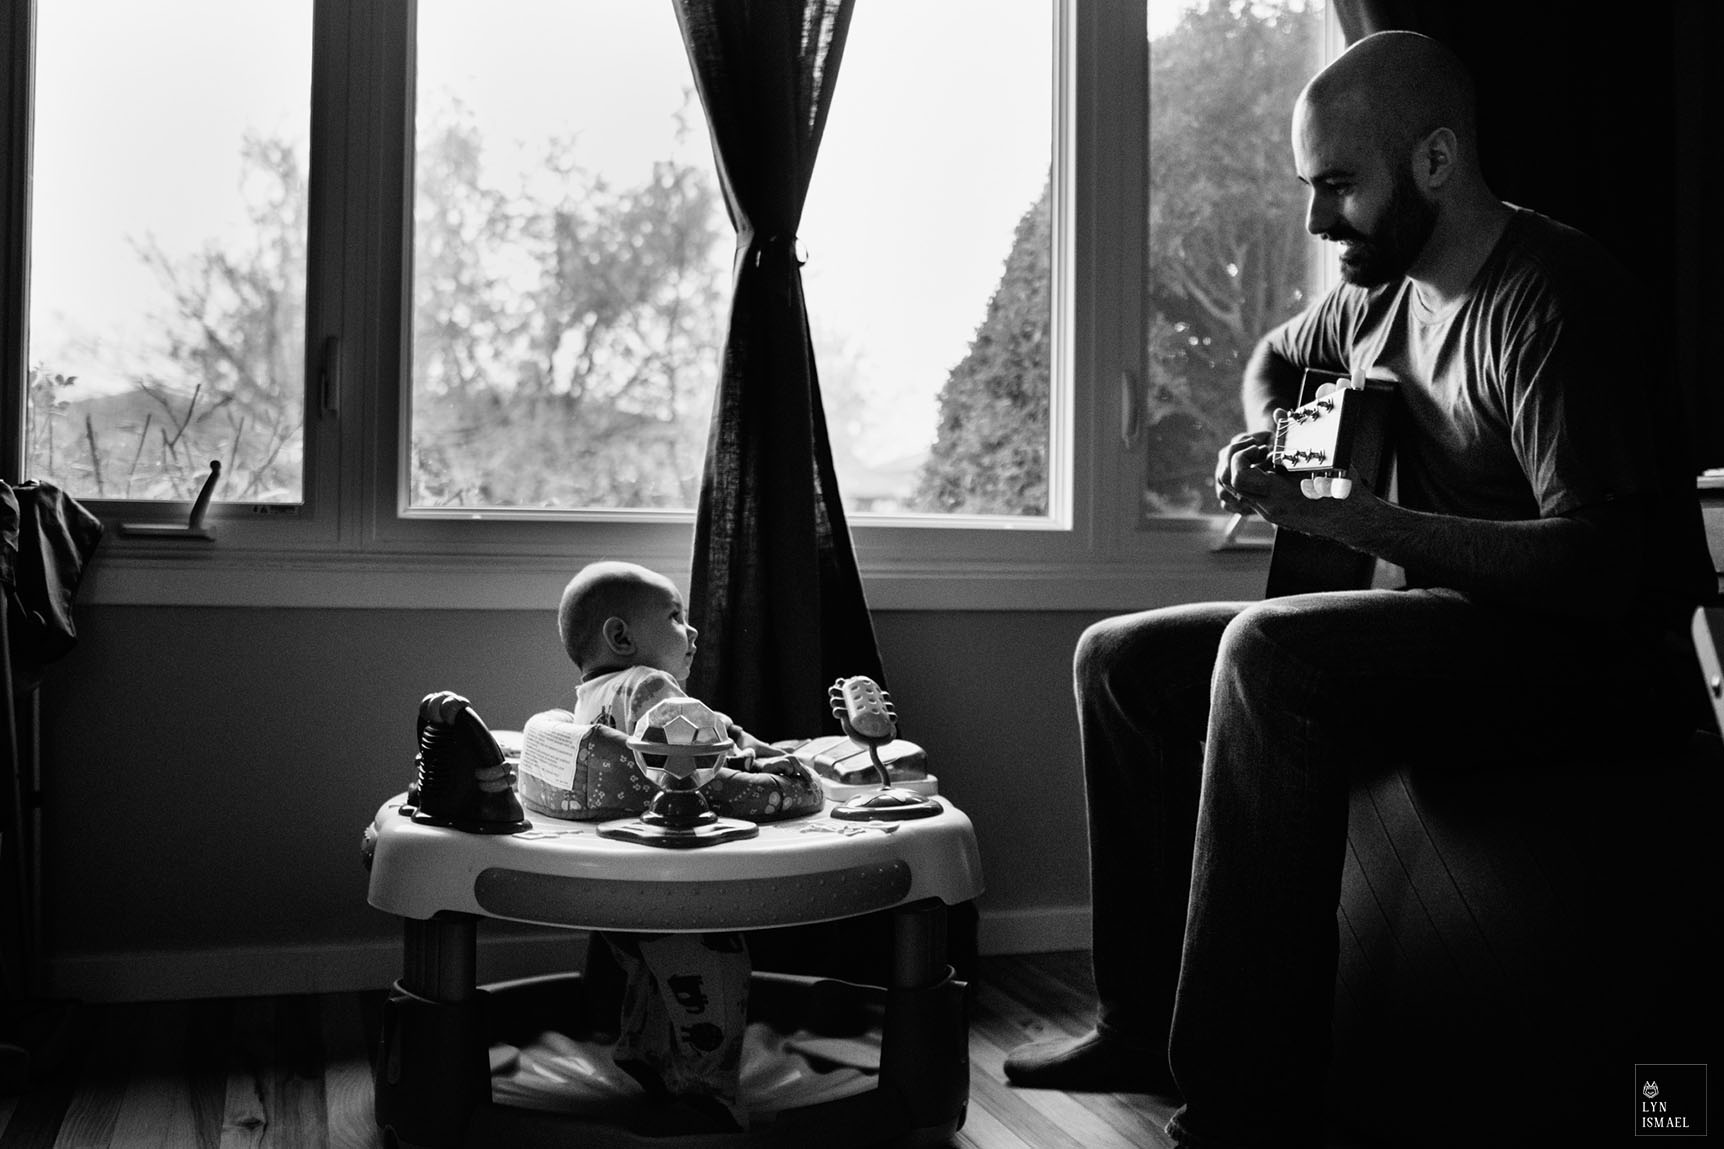 A young father tries to keep his son calm by playing a song as photographed by a Kitchener family documentary photographer